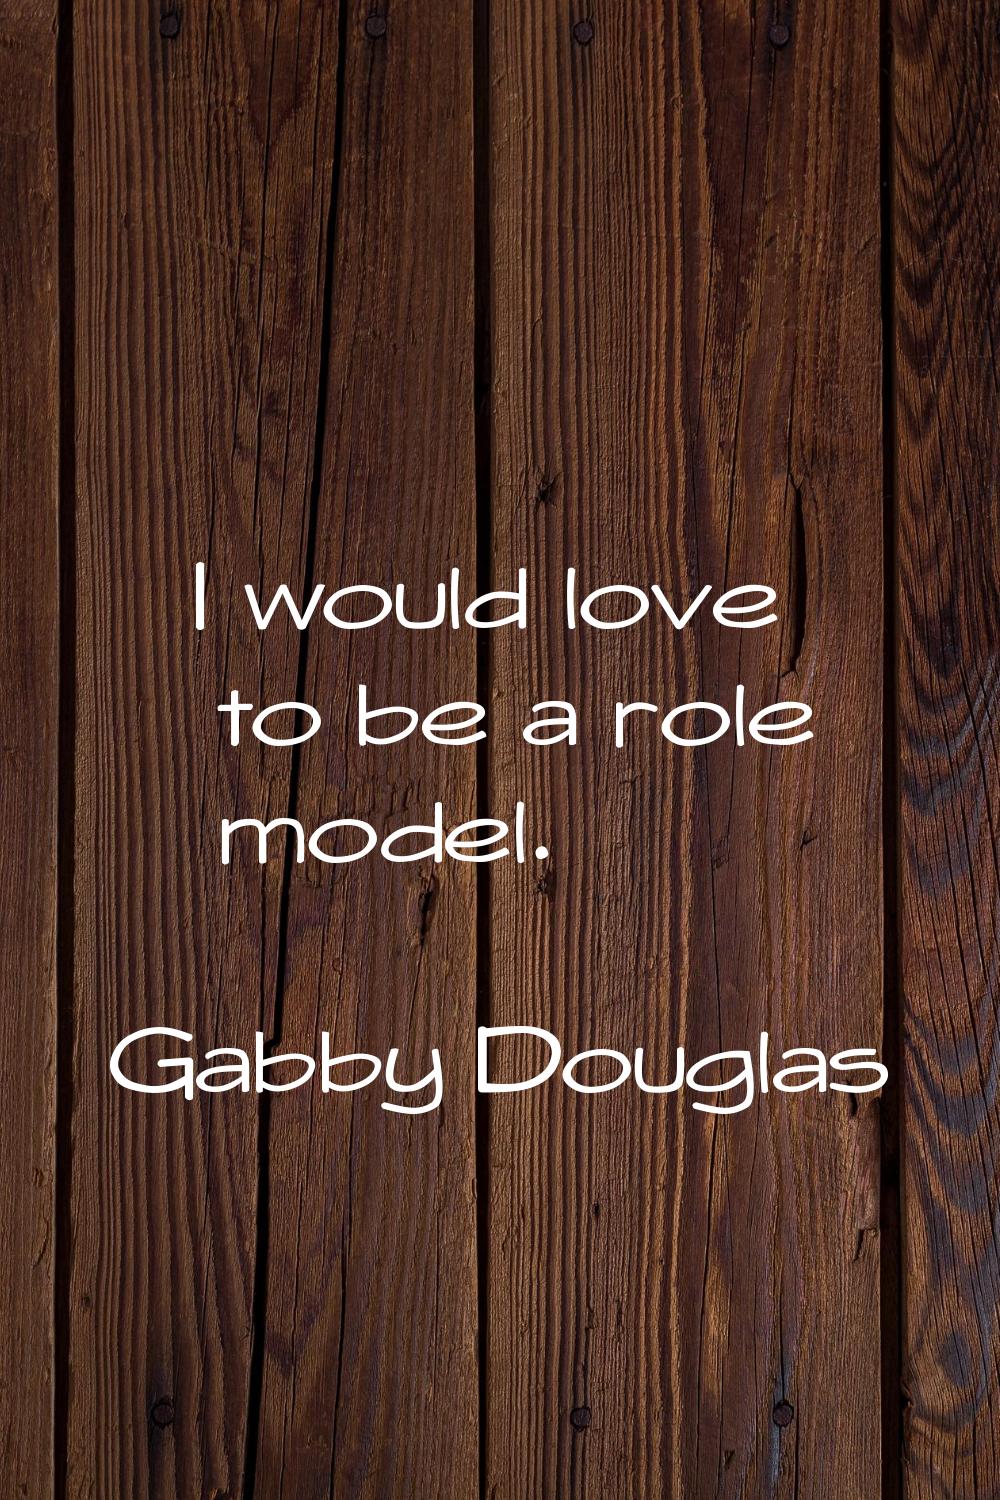 I would love to be a role model.